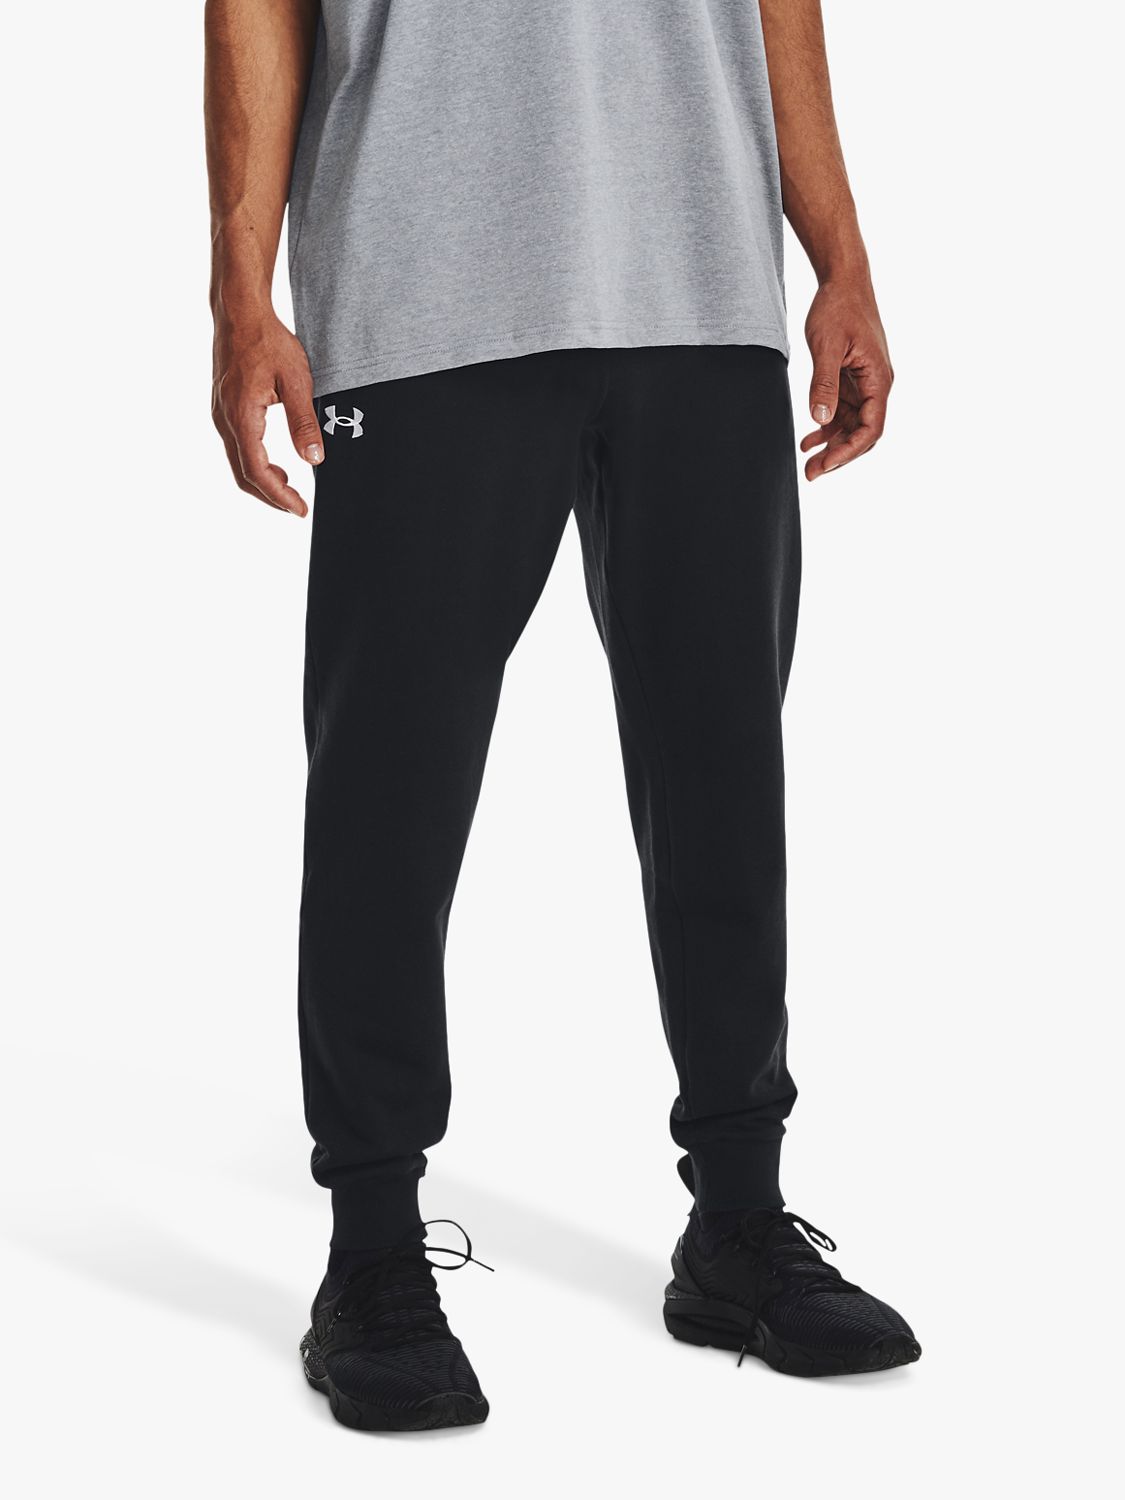 Under Armour Rival Fleece Joggers, Black/White at John Lewis & Partners